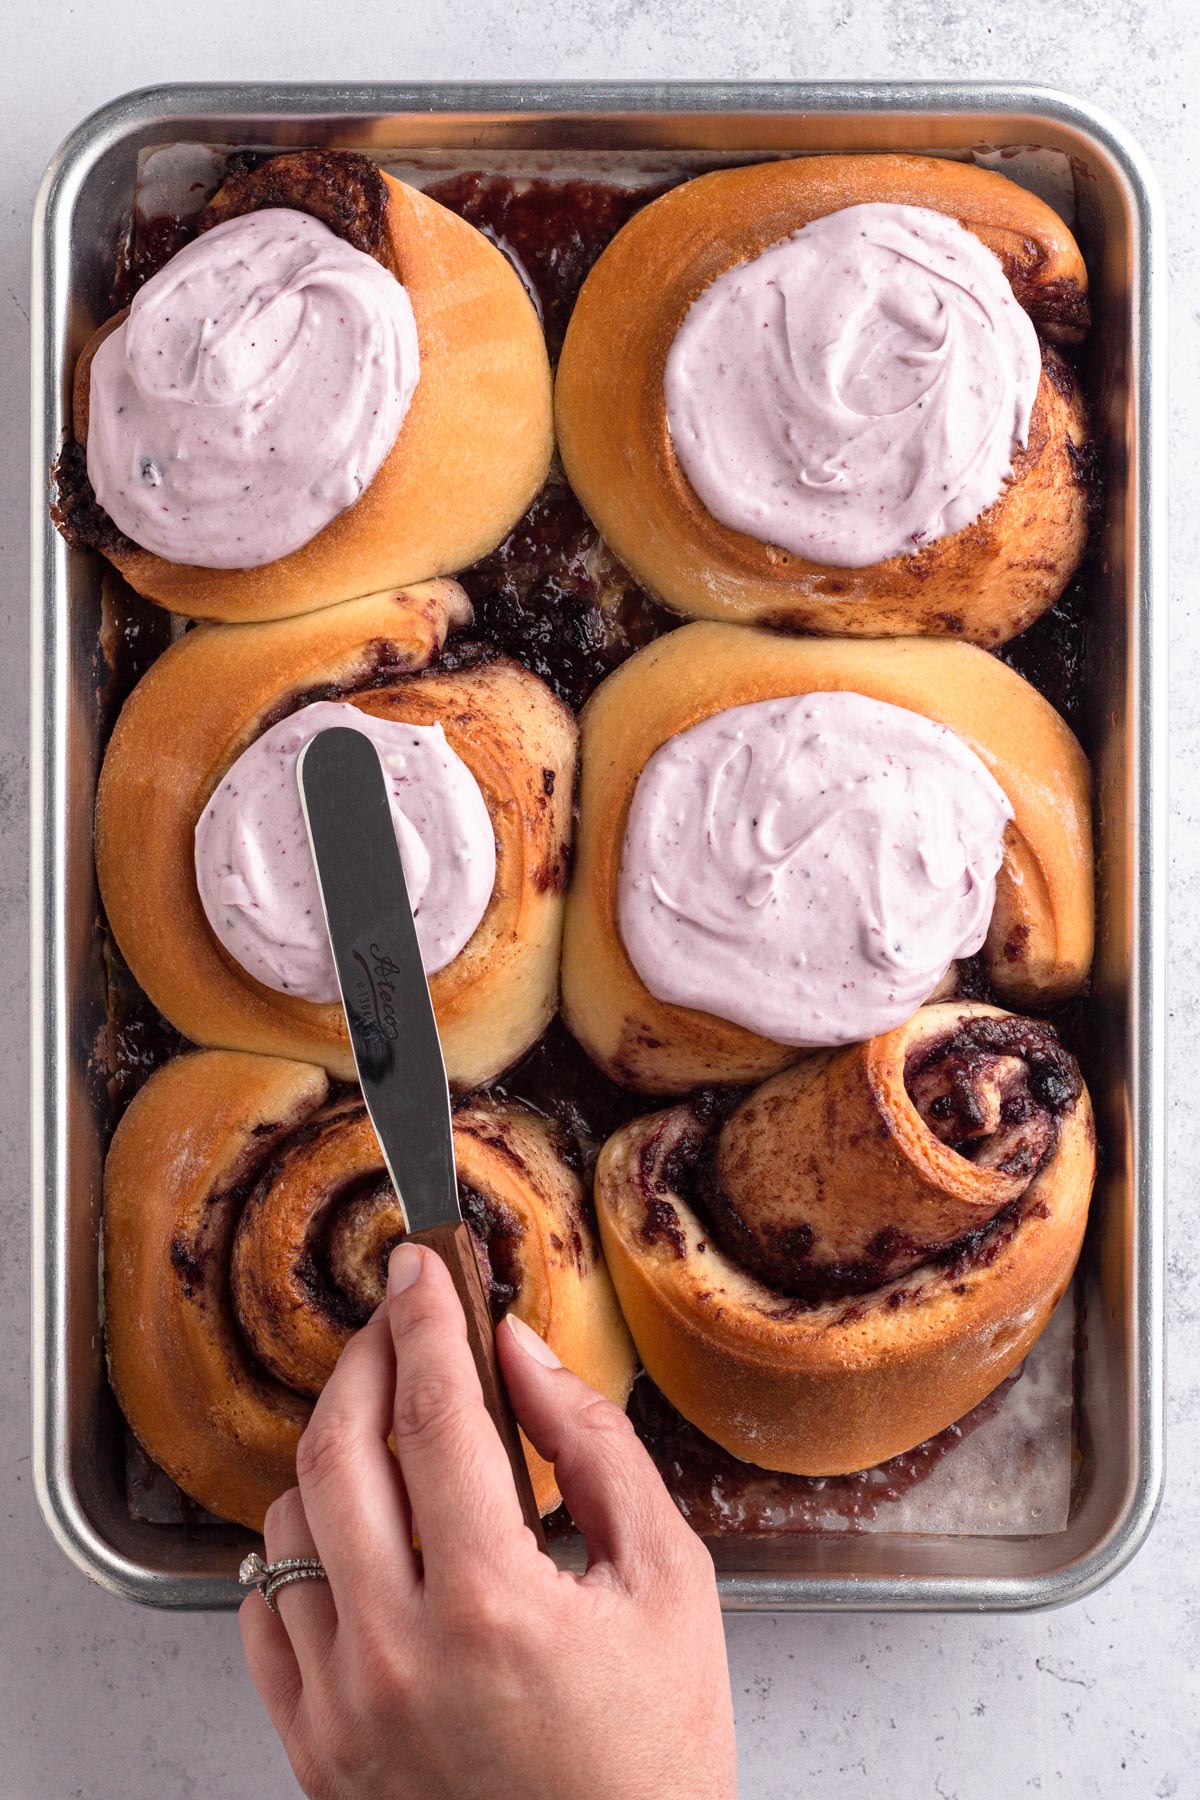 Hand using a spatula to spread icing over cinnamon rolls.